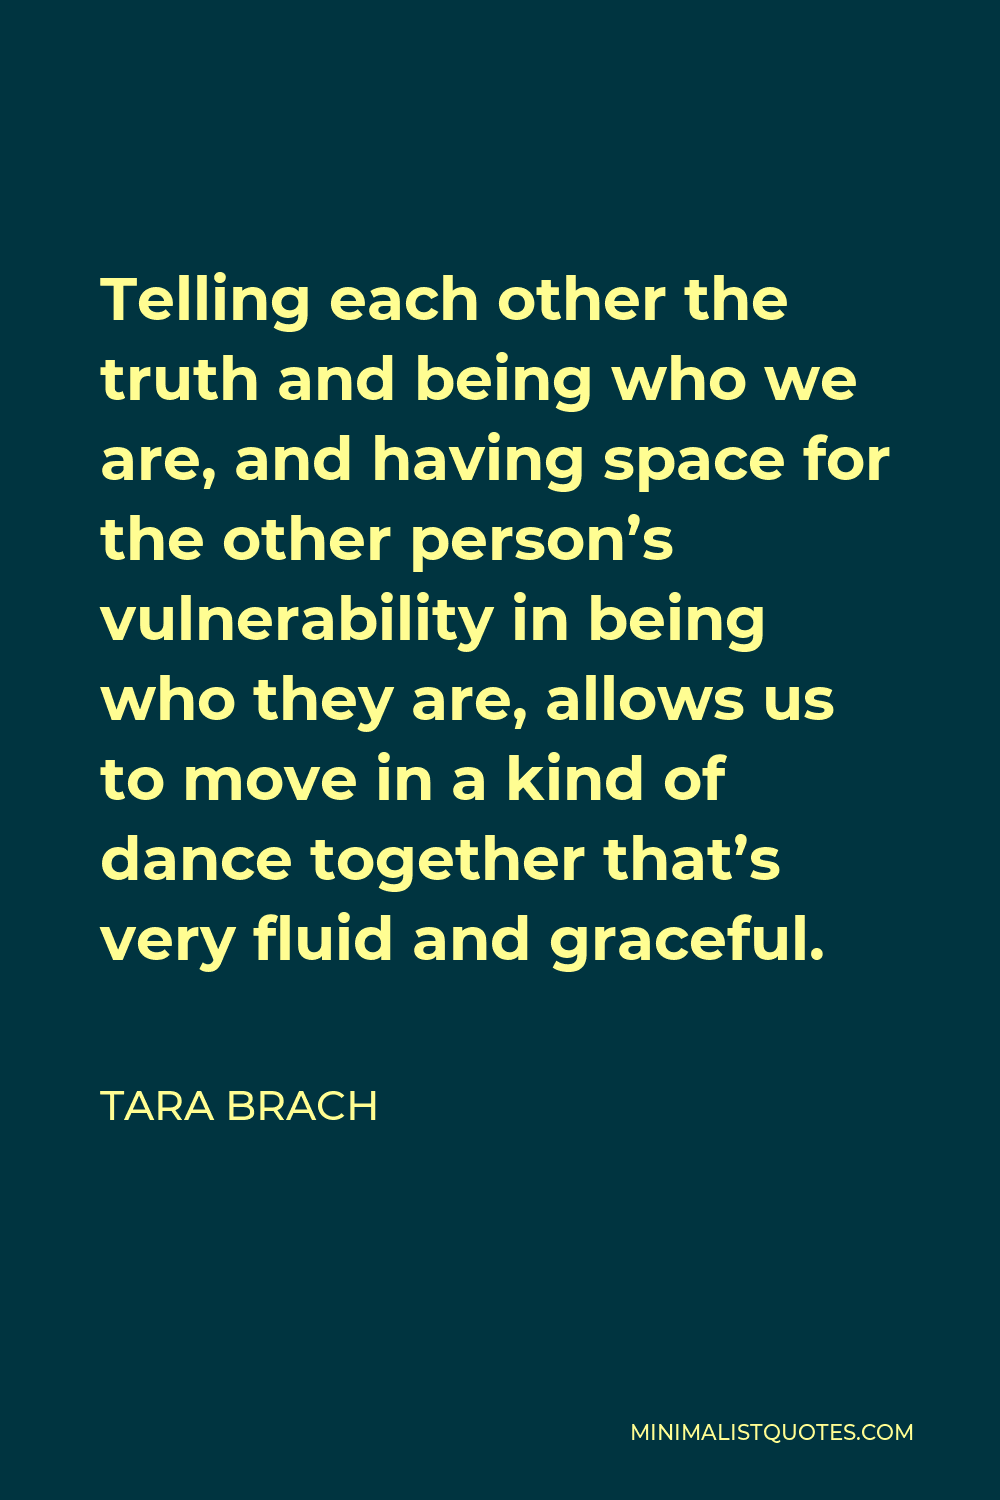 Tara Brach Quote - Telling each other the truth and being who we are, and having space for the other person’s vulnerability in being who they are, allows us to move in a kind of dance together that’s very fluid and graceful.